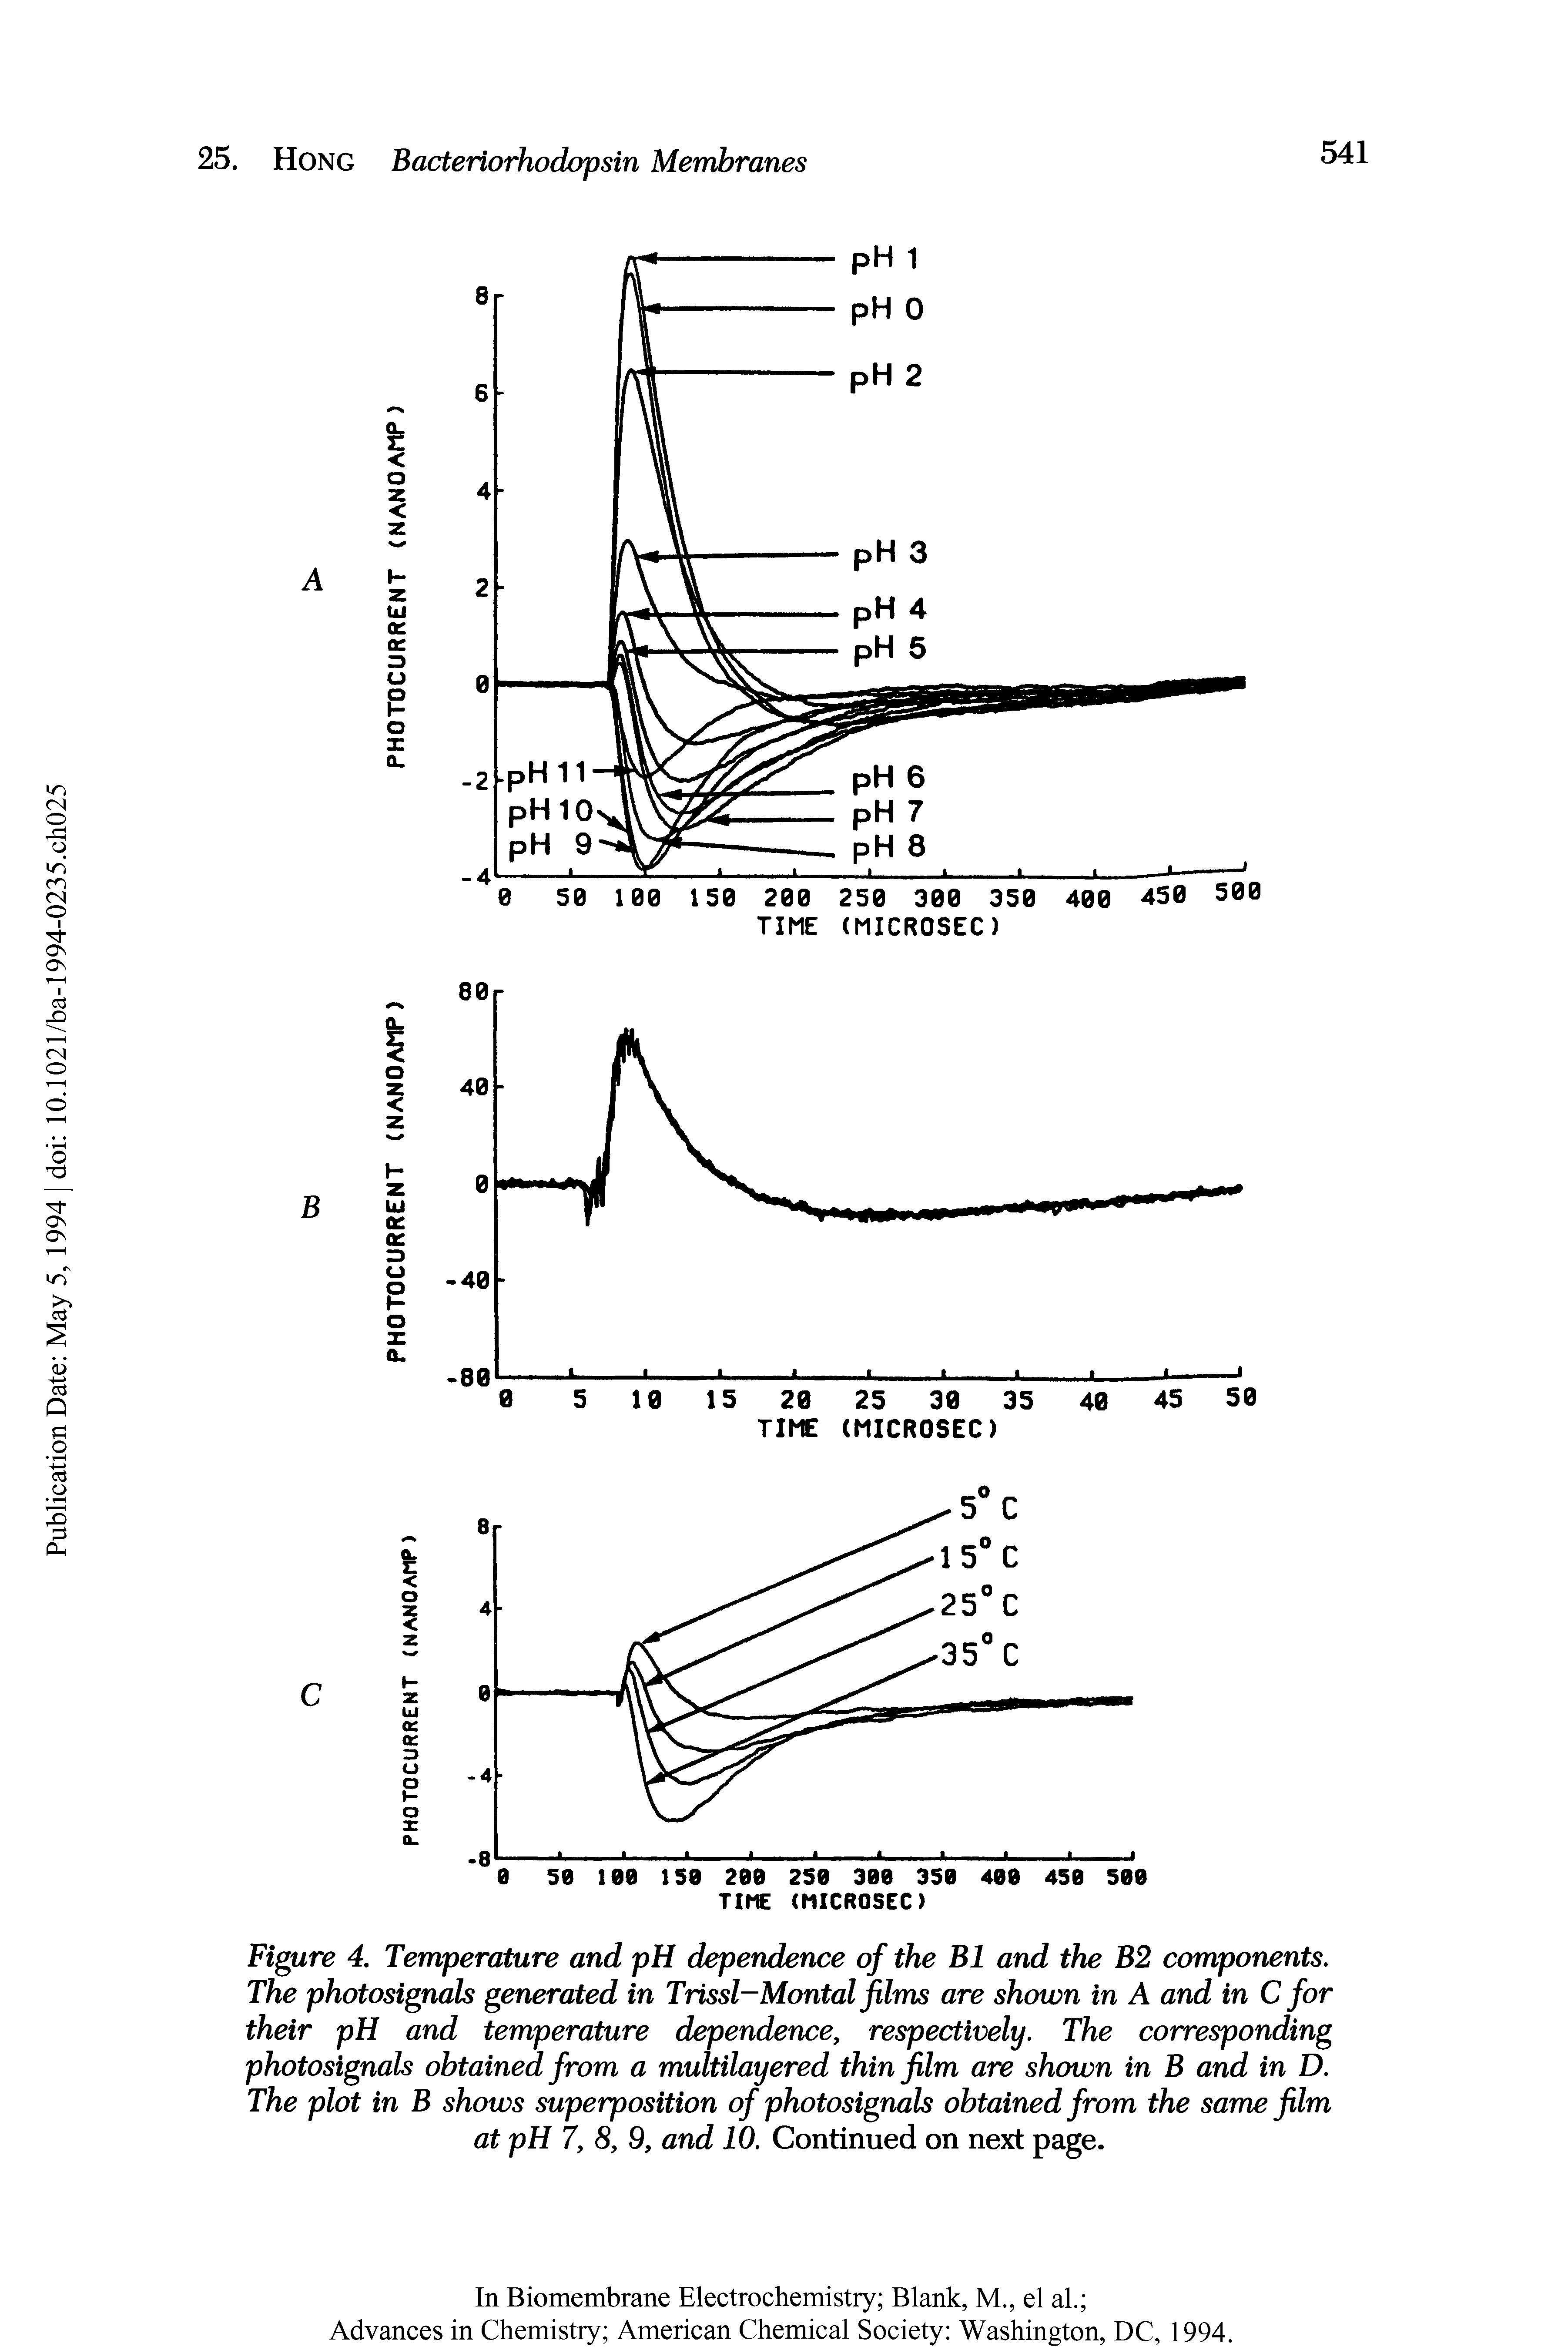 Figure 4. Temperature and pH dependence of the B1 and the B2 components. The photosignals generated in Trissl-Montal films are shown in A and in C for their pH and temperature dependence, respectively. The corresponding photosignals obtained from a multilayered thin film are shown in B and in D. The plot in B shows superposition of photosignals obtained from the same film at pH 7, <5, 9, and 10. Continued on next page.